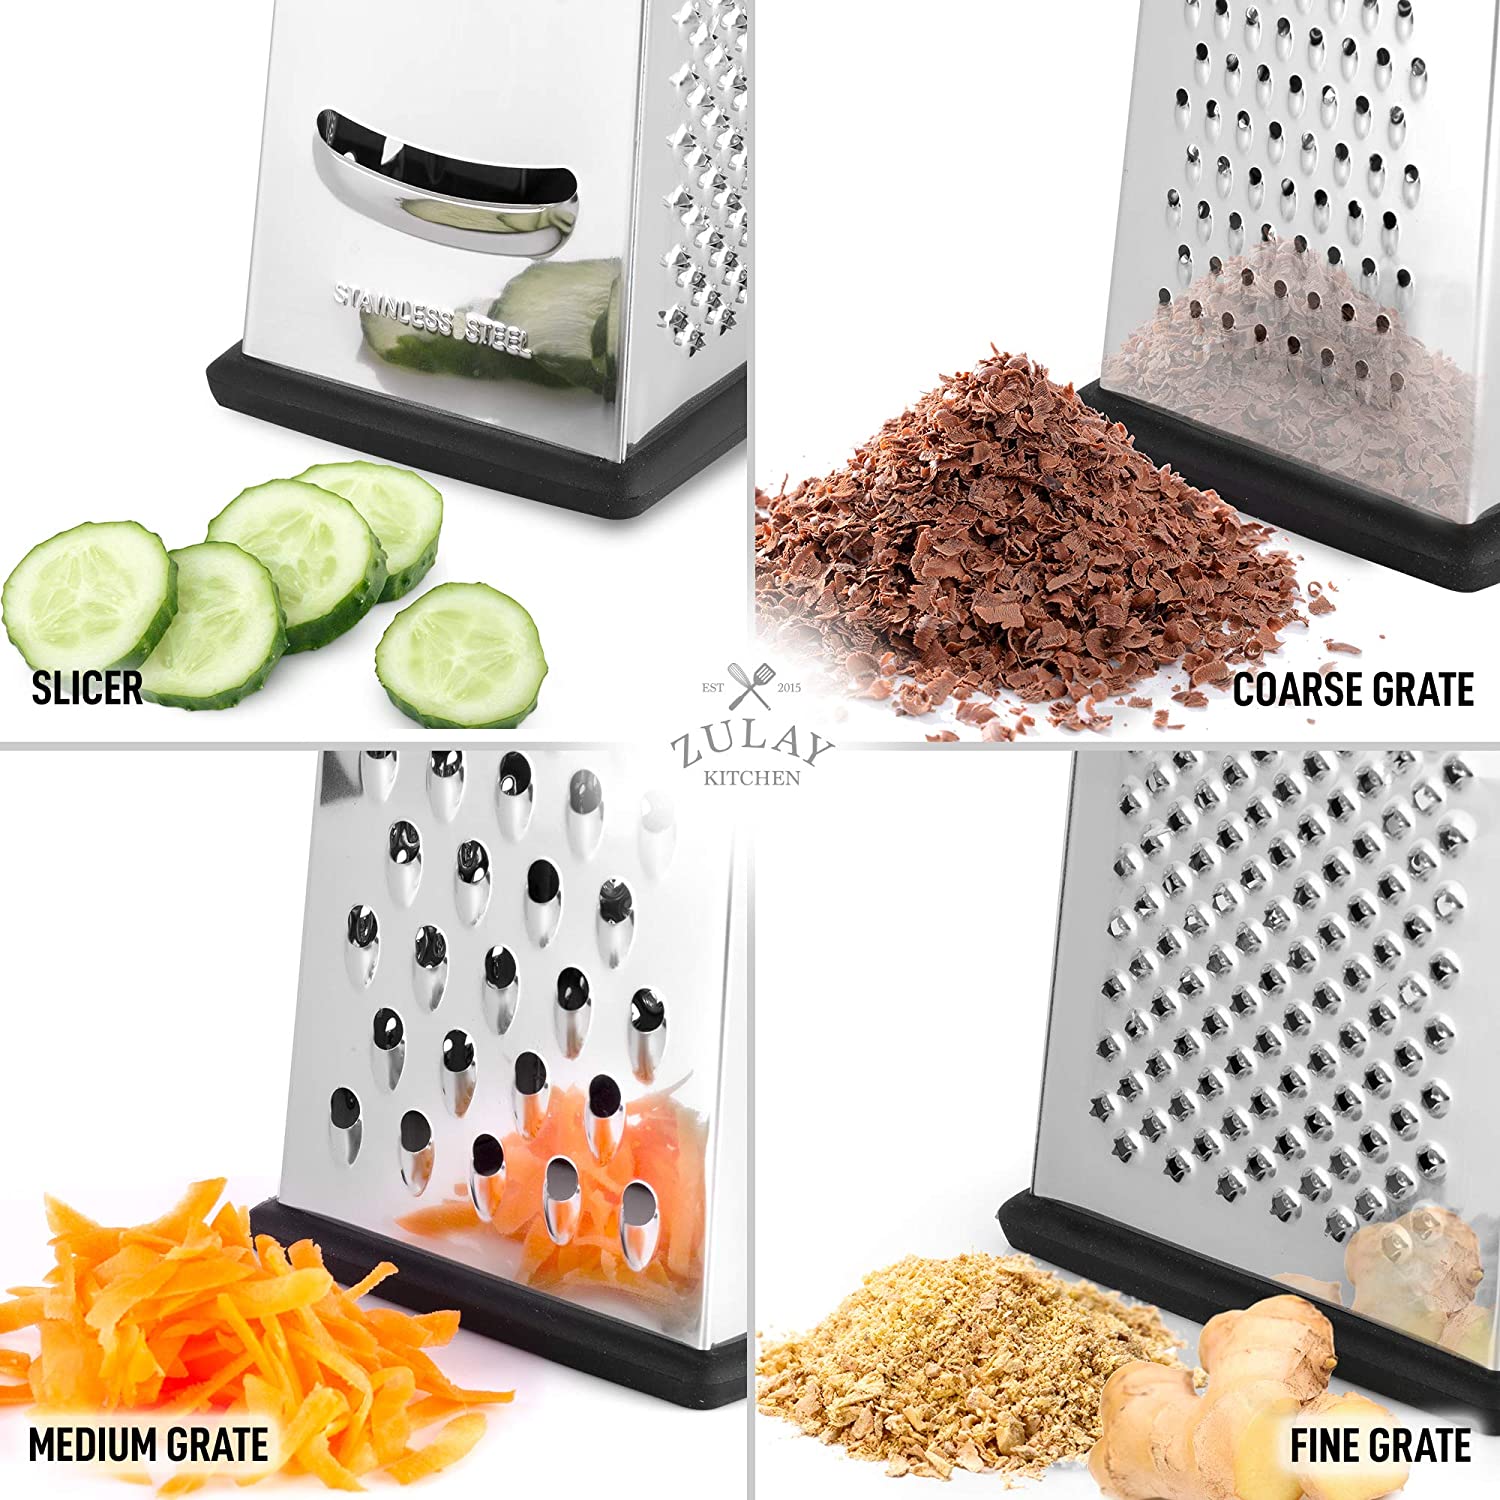 4-Sided Cheese Grater With Container - Zulay KitchenZulay Kitchen